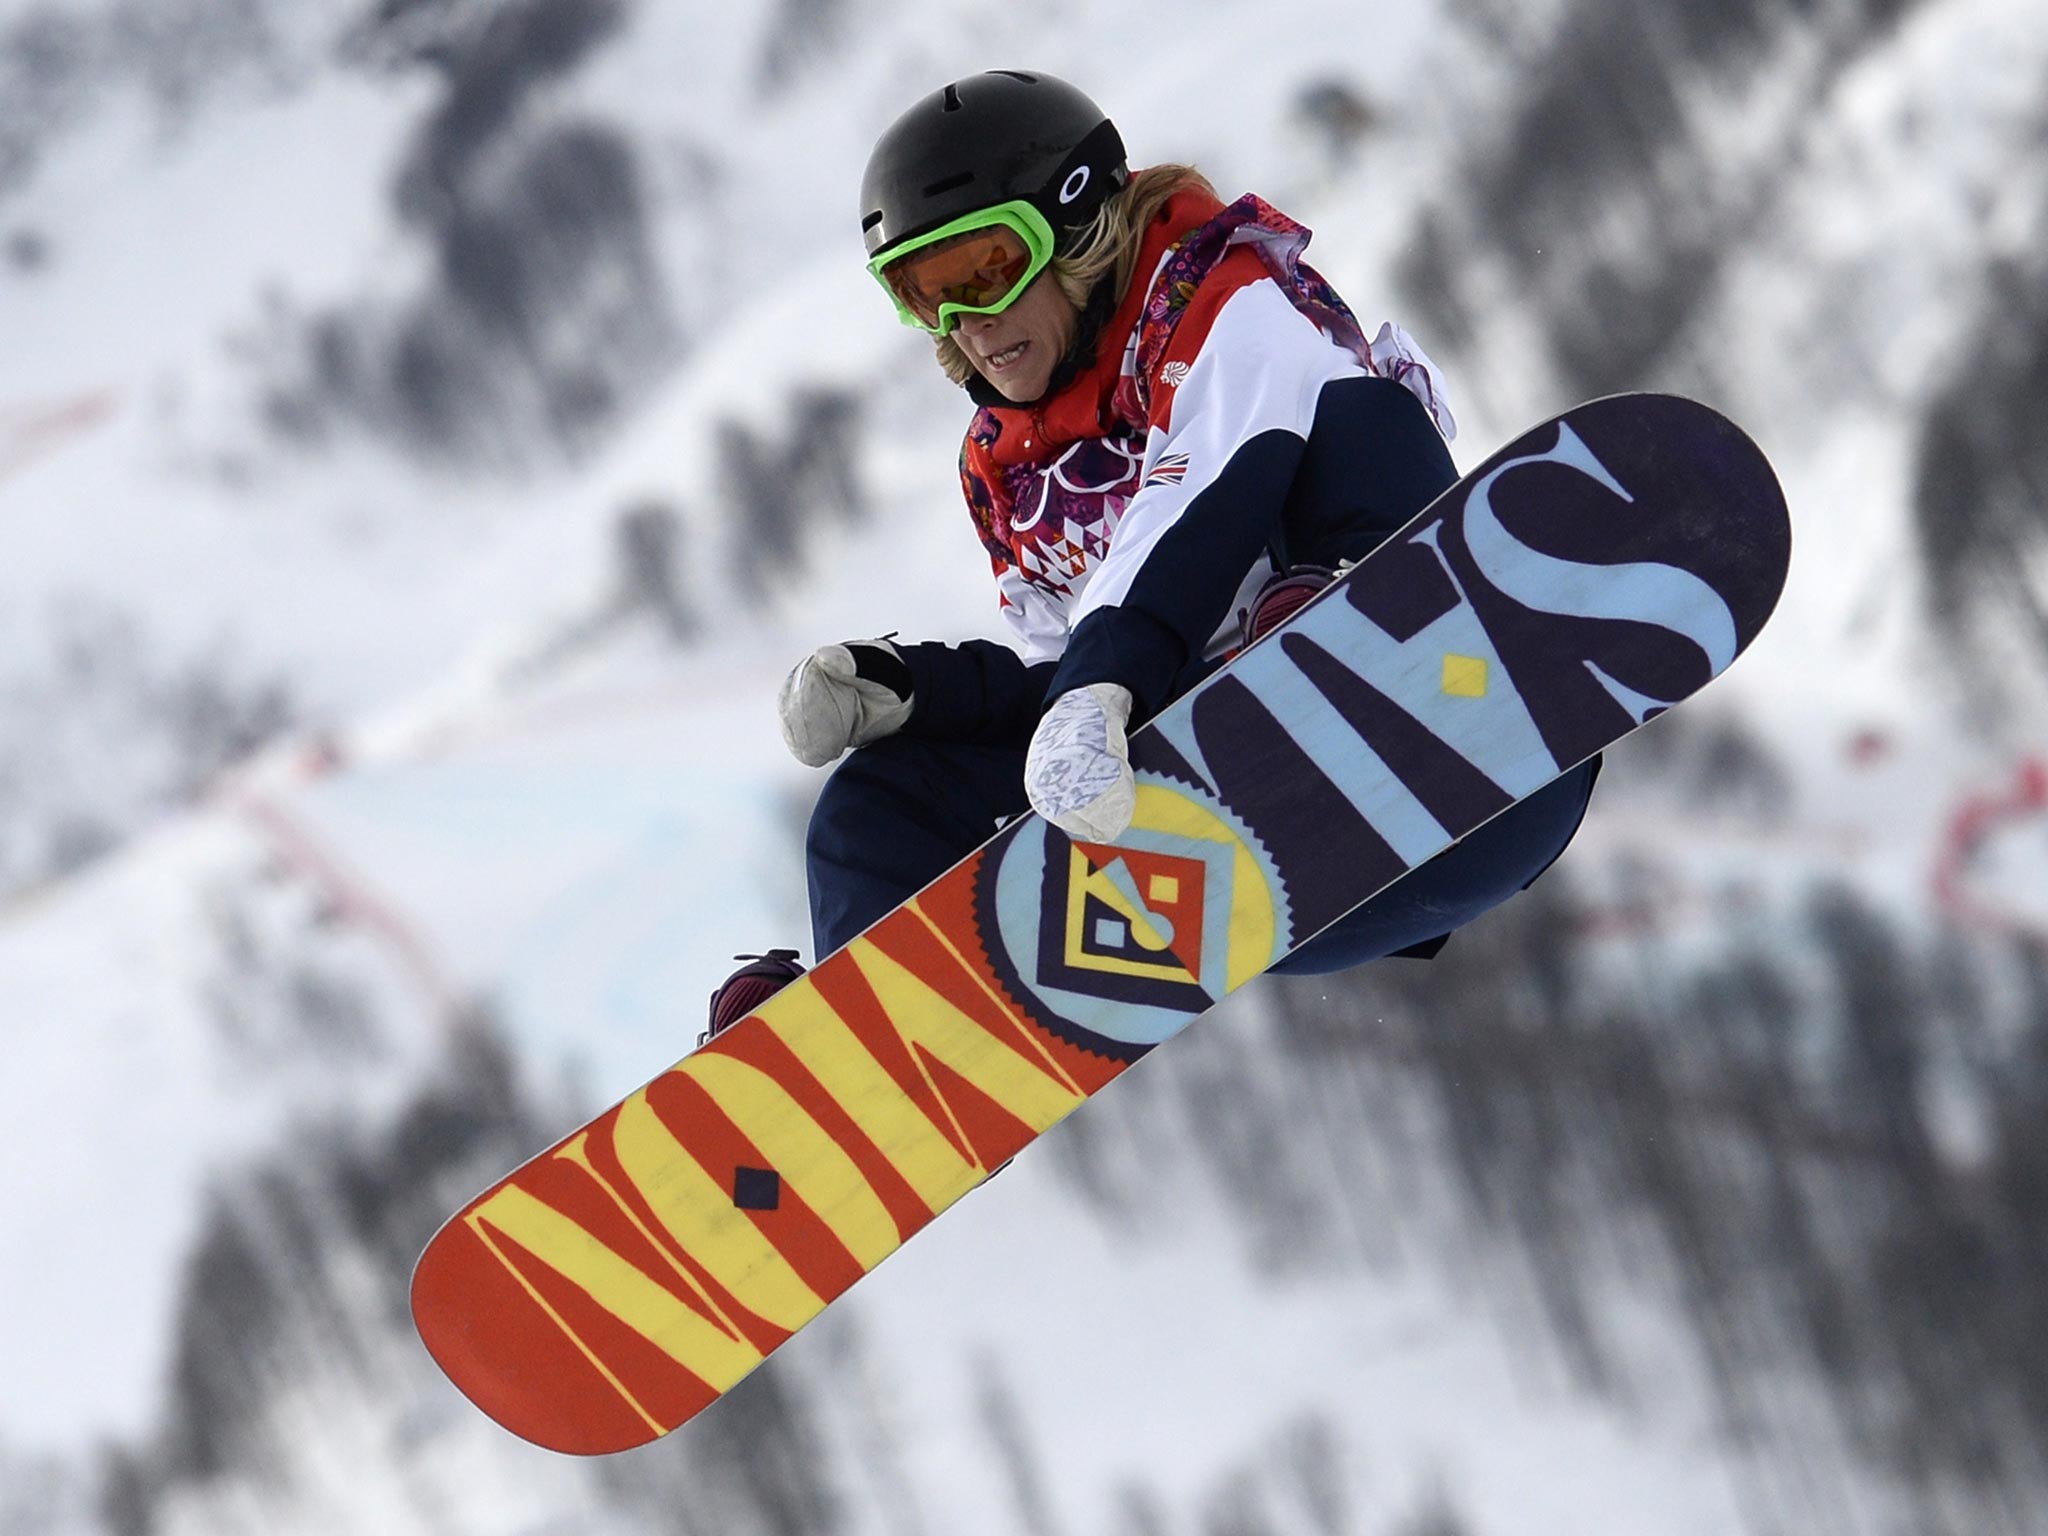 Jenny Jones showcases the slopestyle moves that won her a bronze medal for Great Britain in the snowboarding this week